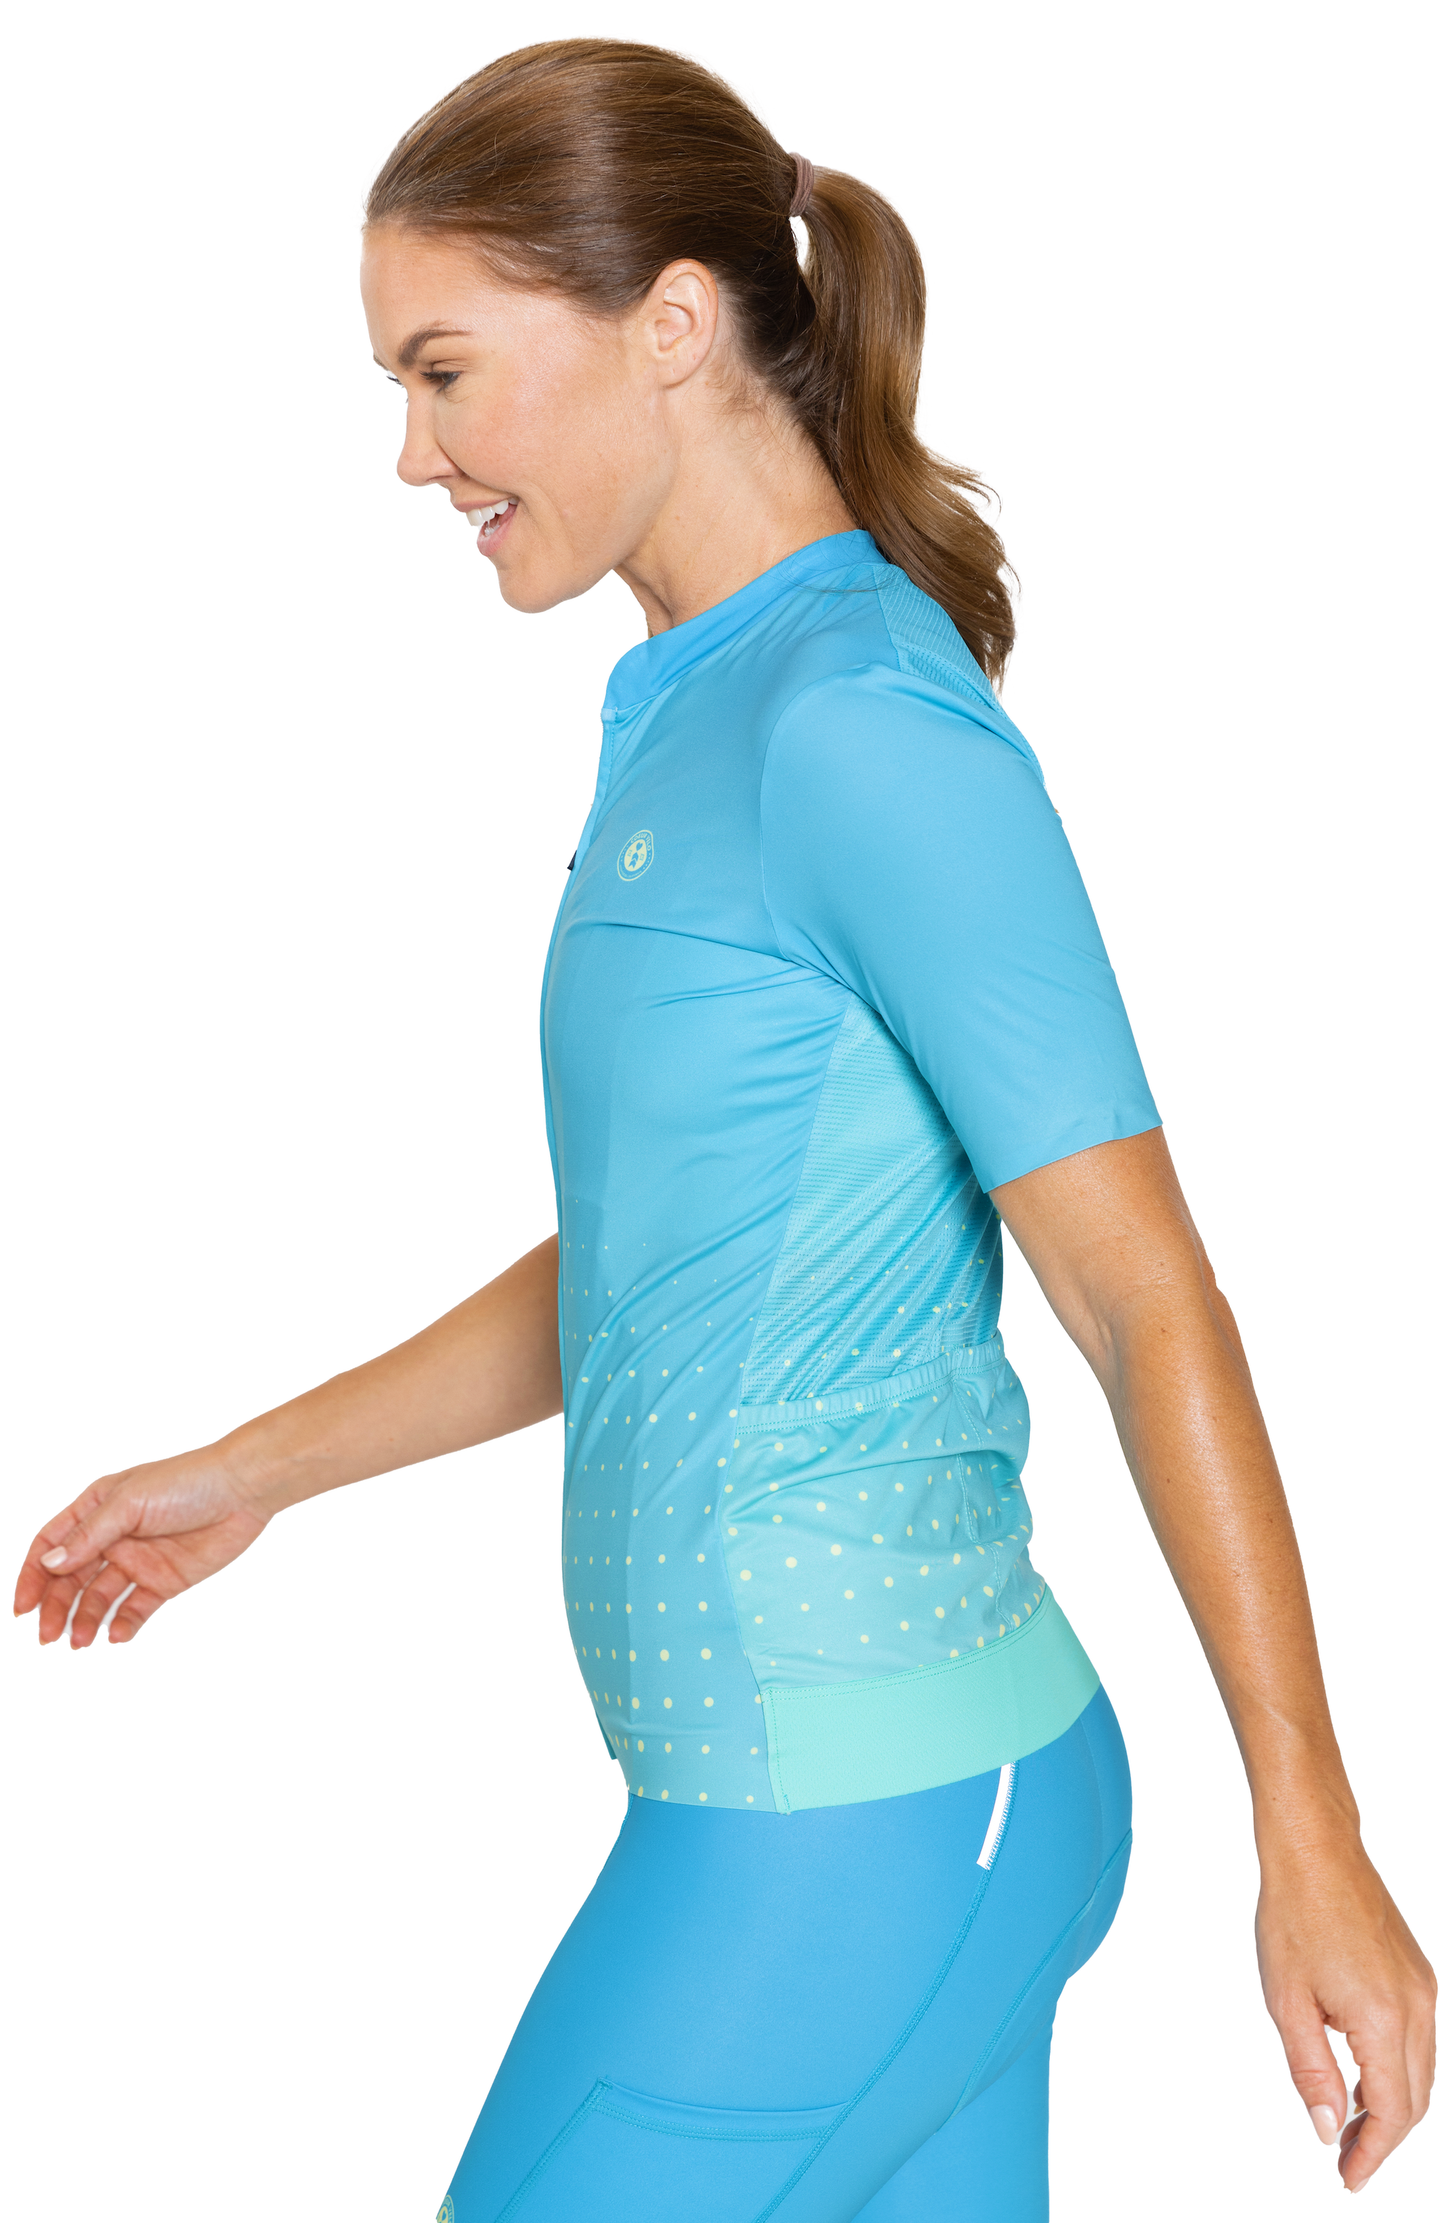 Coeur Sports Cycling Jersey Fjord Women's Cycling Jersey